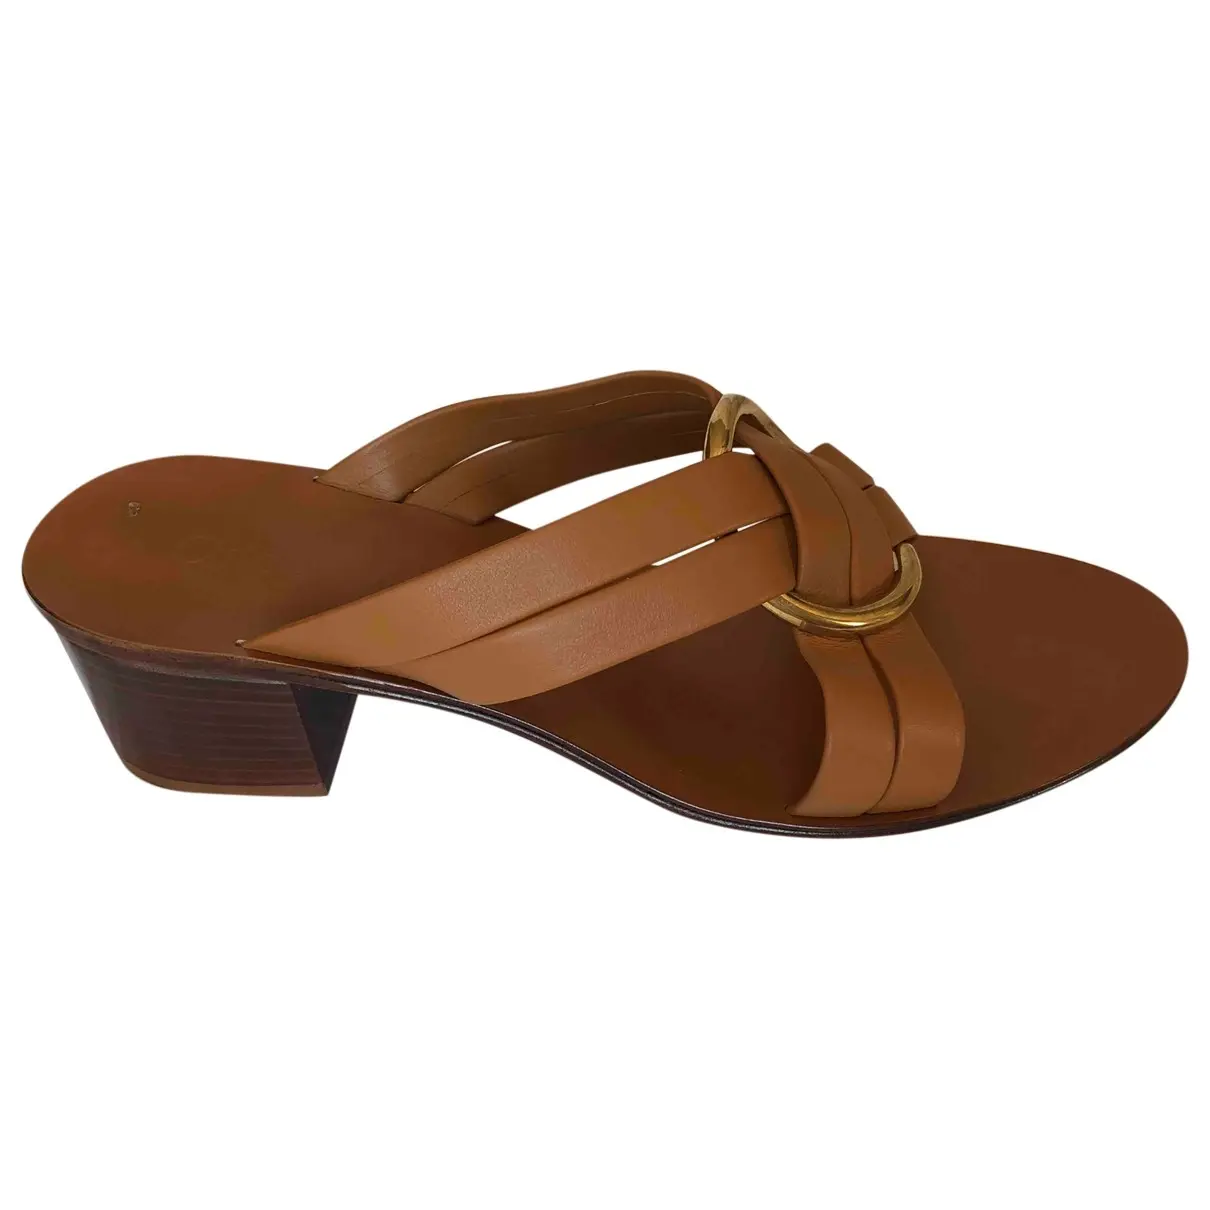 Rony leather sandals Chloé